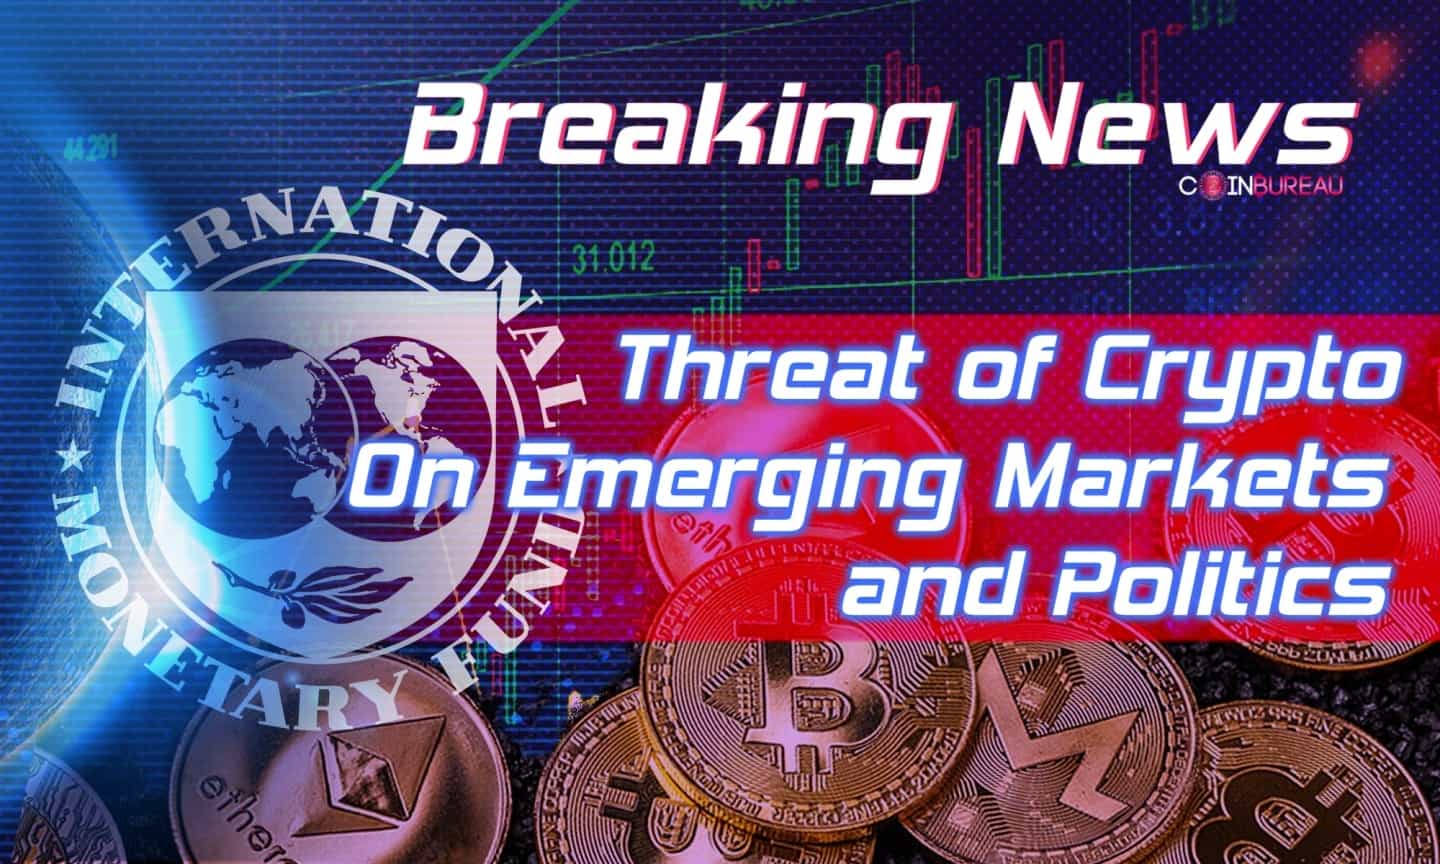 IMG Report Highlights Threat of Crypto on Emerging Markets and Politics